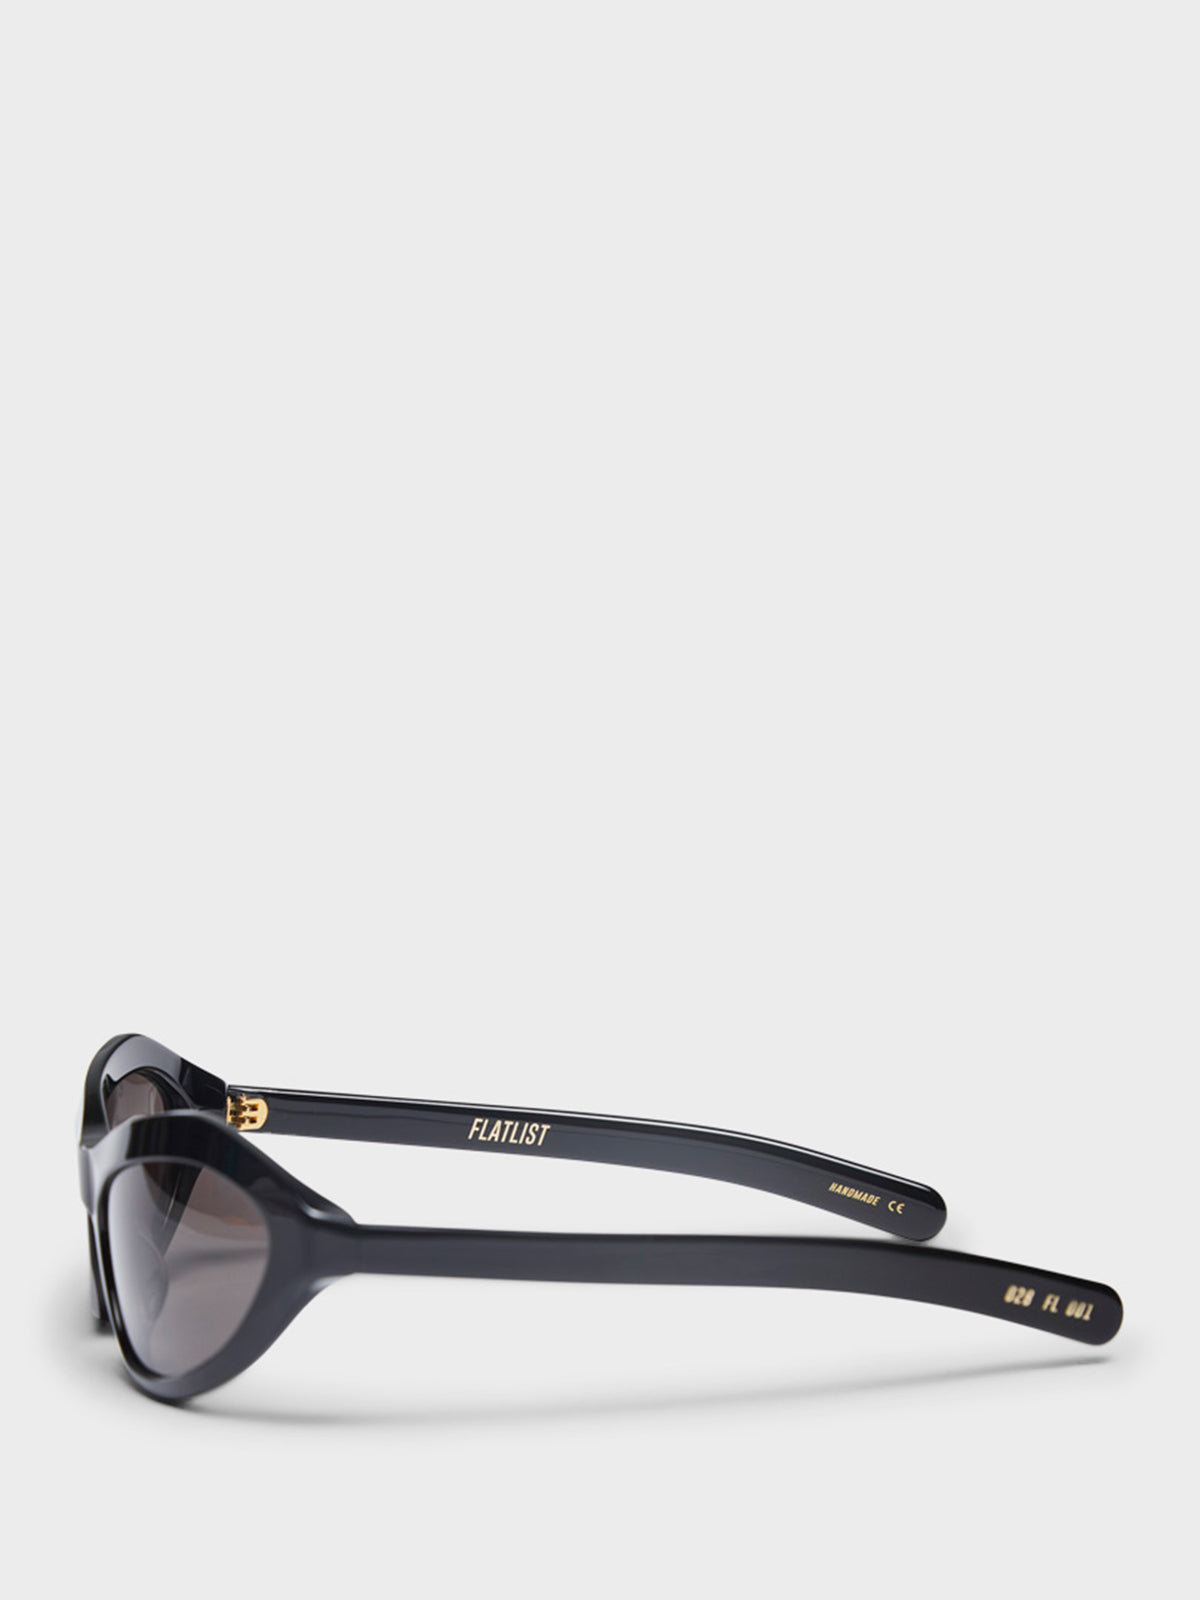 Akiwa Sunglasses in Solid Black with Solid Black Lens